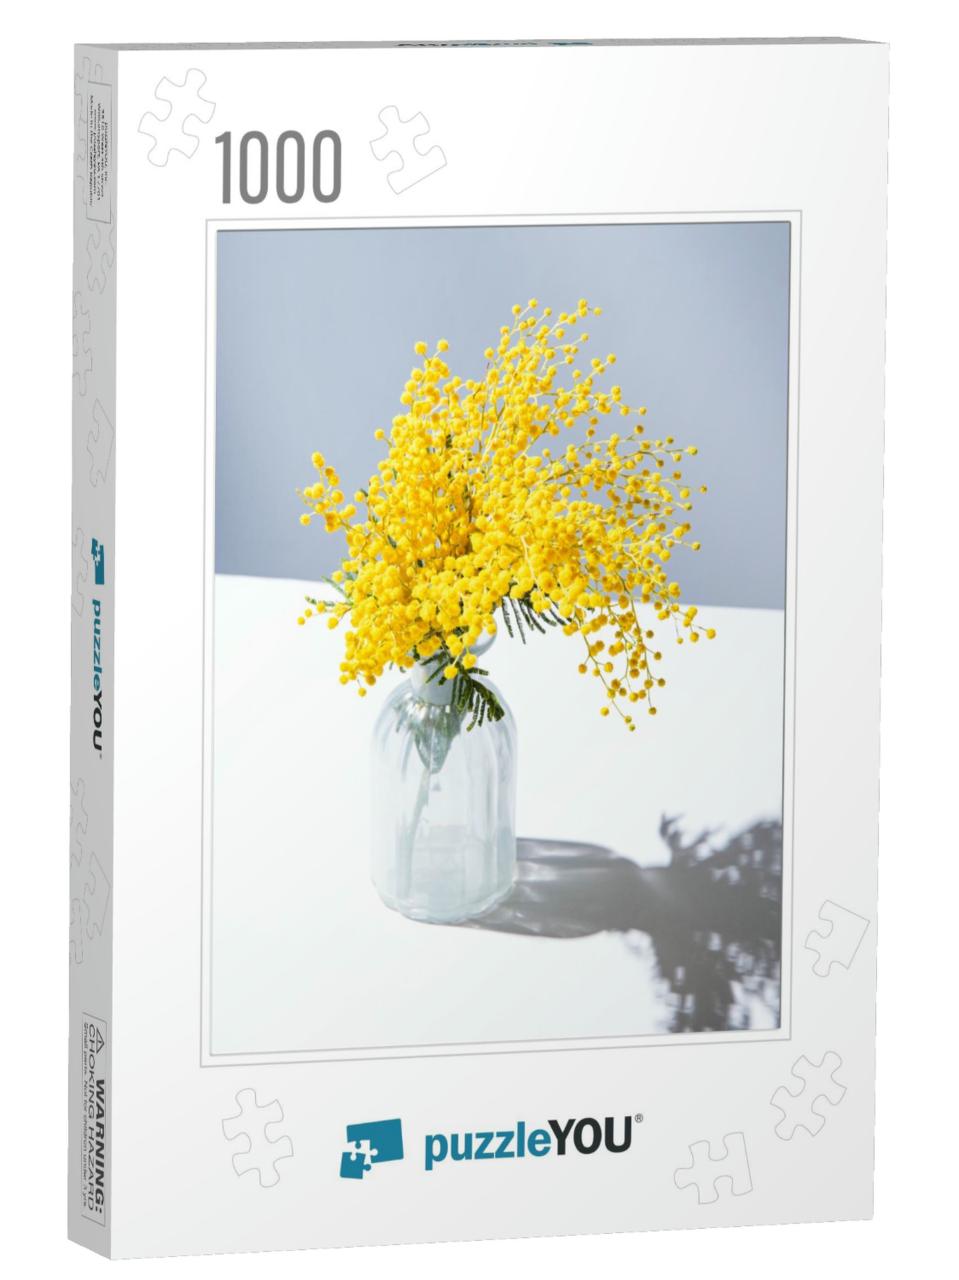 A Bouquet of Yellow Mimosa Flowers Stands in a Glass Vase... Jigsaw Puzzle with 1000 pieces